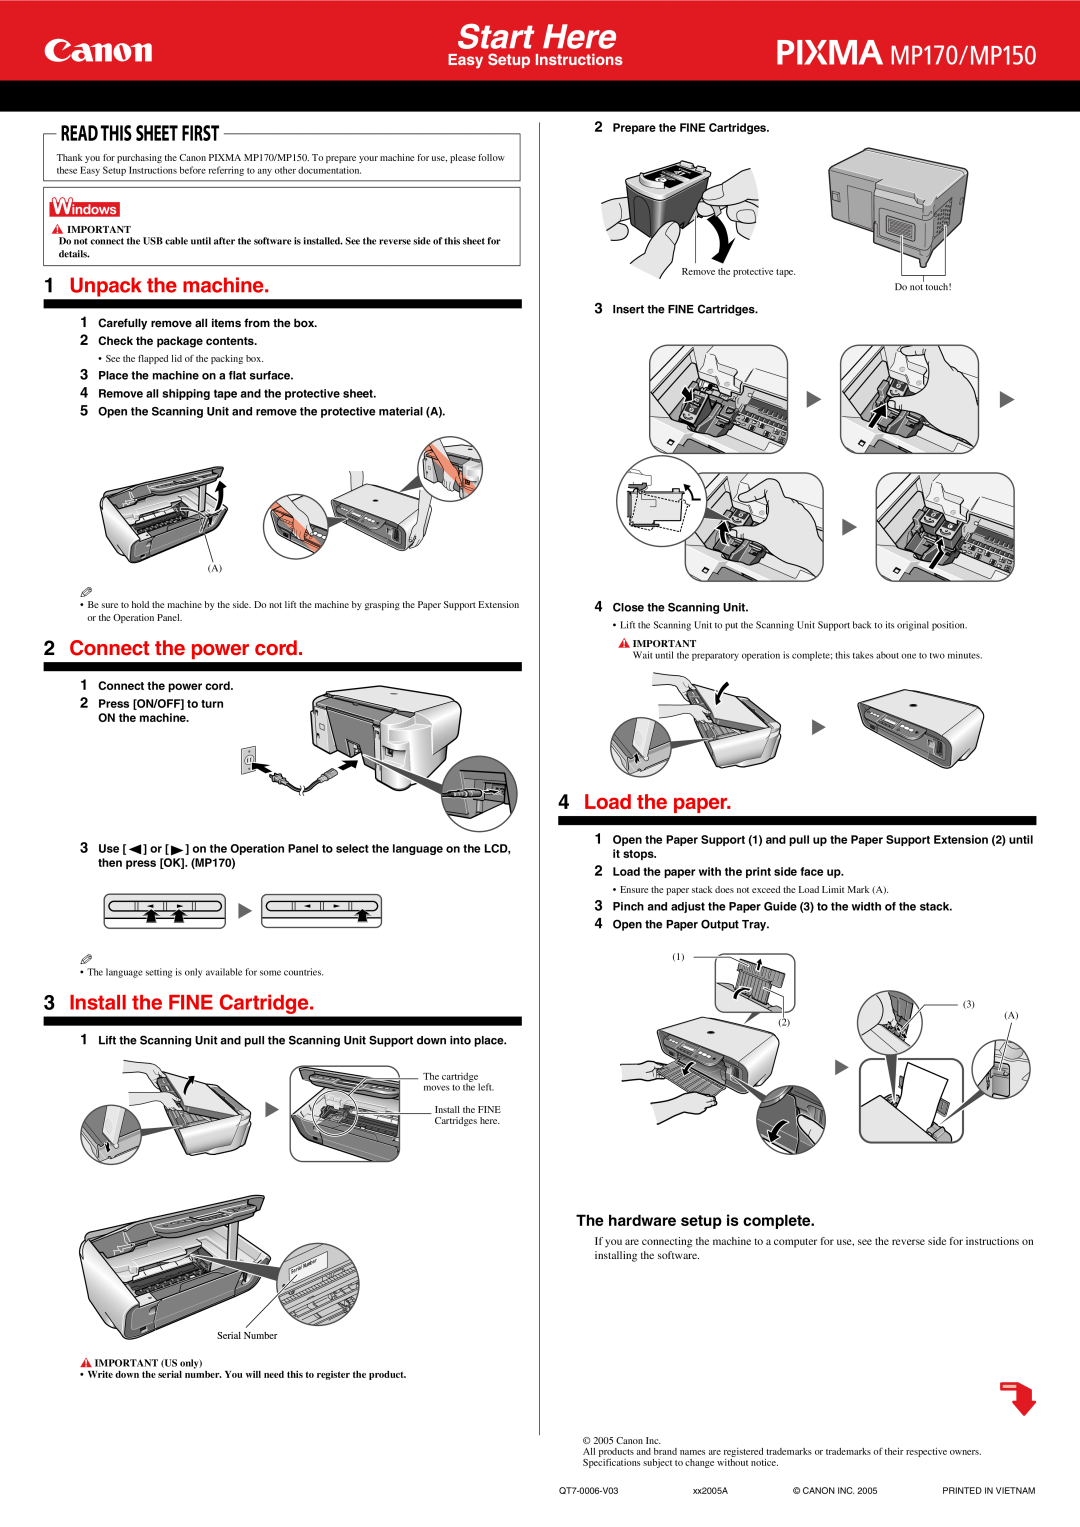 Canon MP150, MP170 specifications Unpack the machine, Connect the power cord, Install the FINE Cartridge, Load the paper 